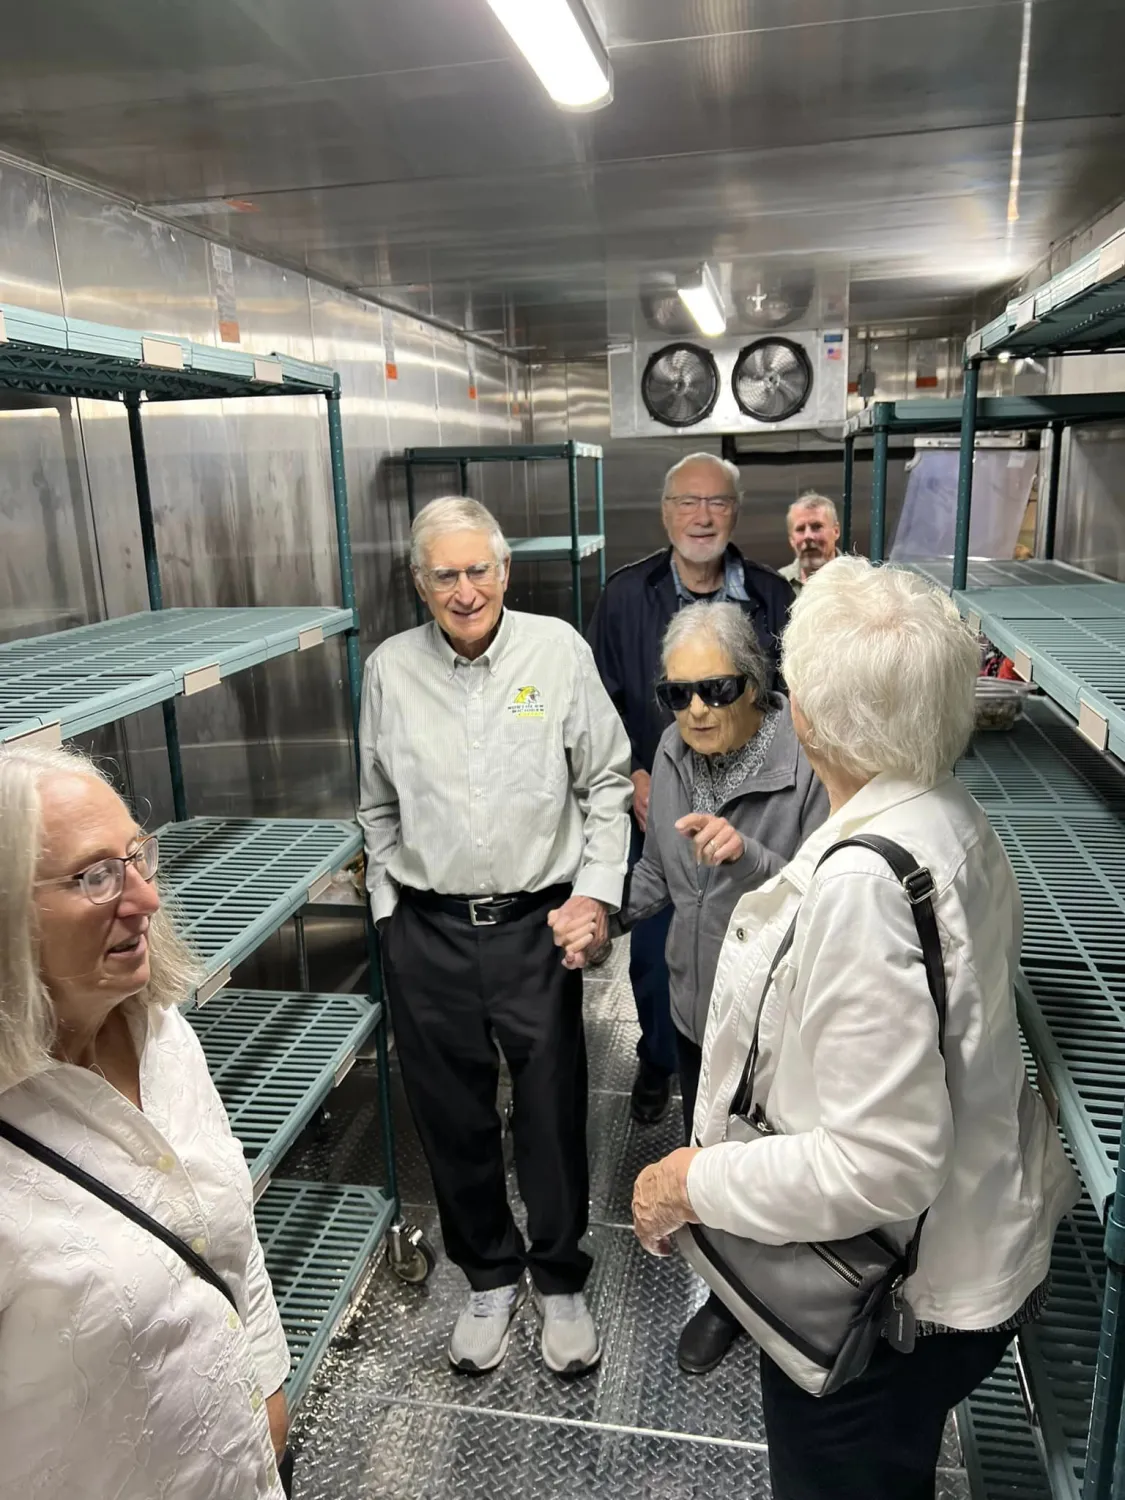 Retirees receiving a tour of the new Hospitality Management space in the Northern Center - 2022